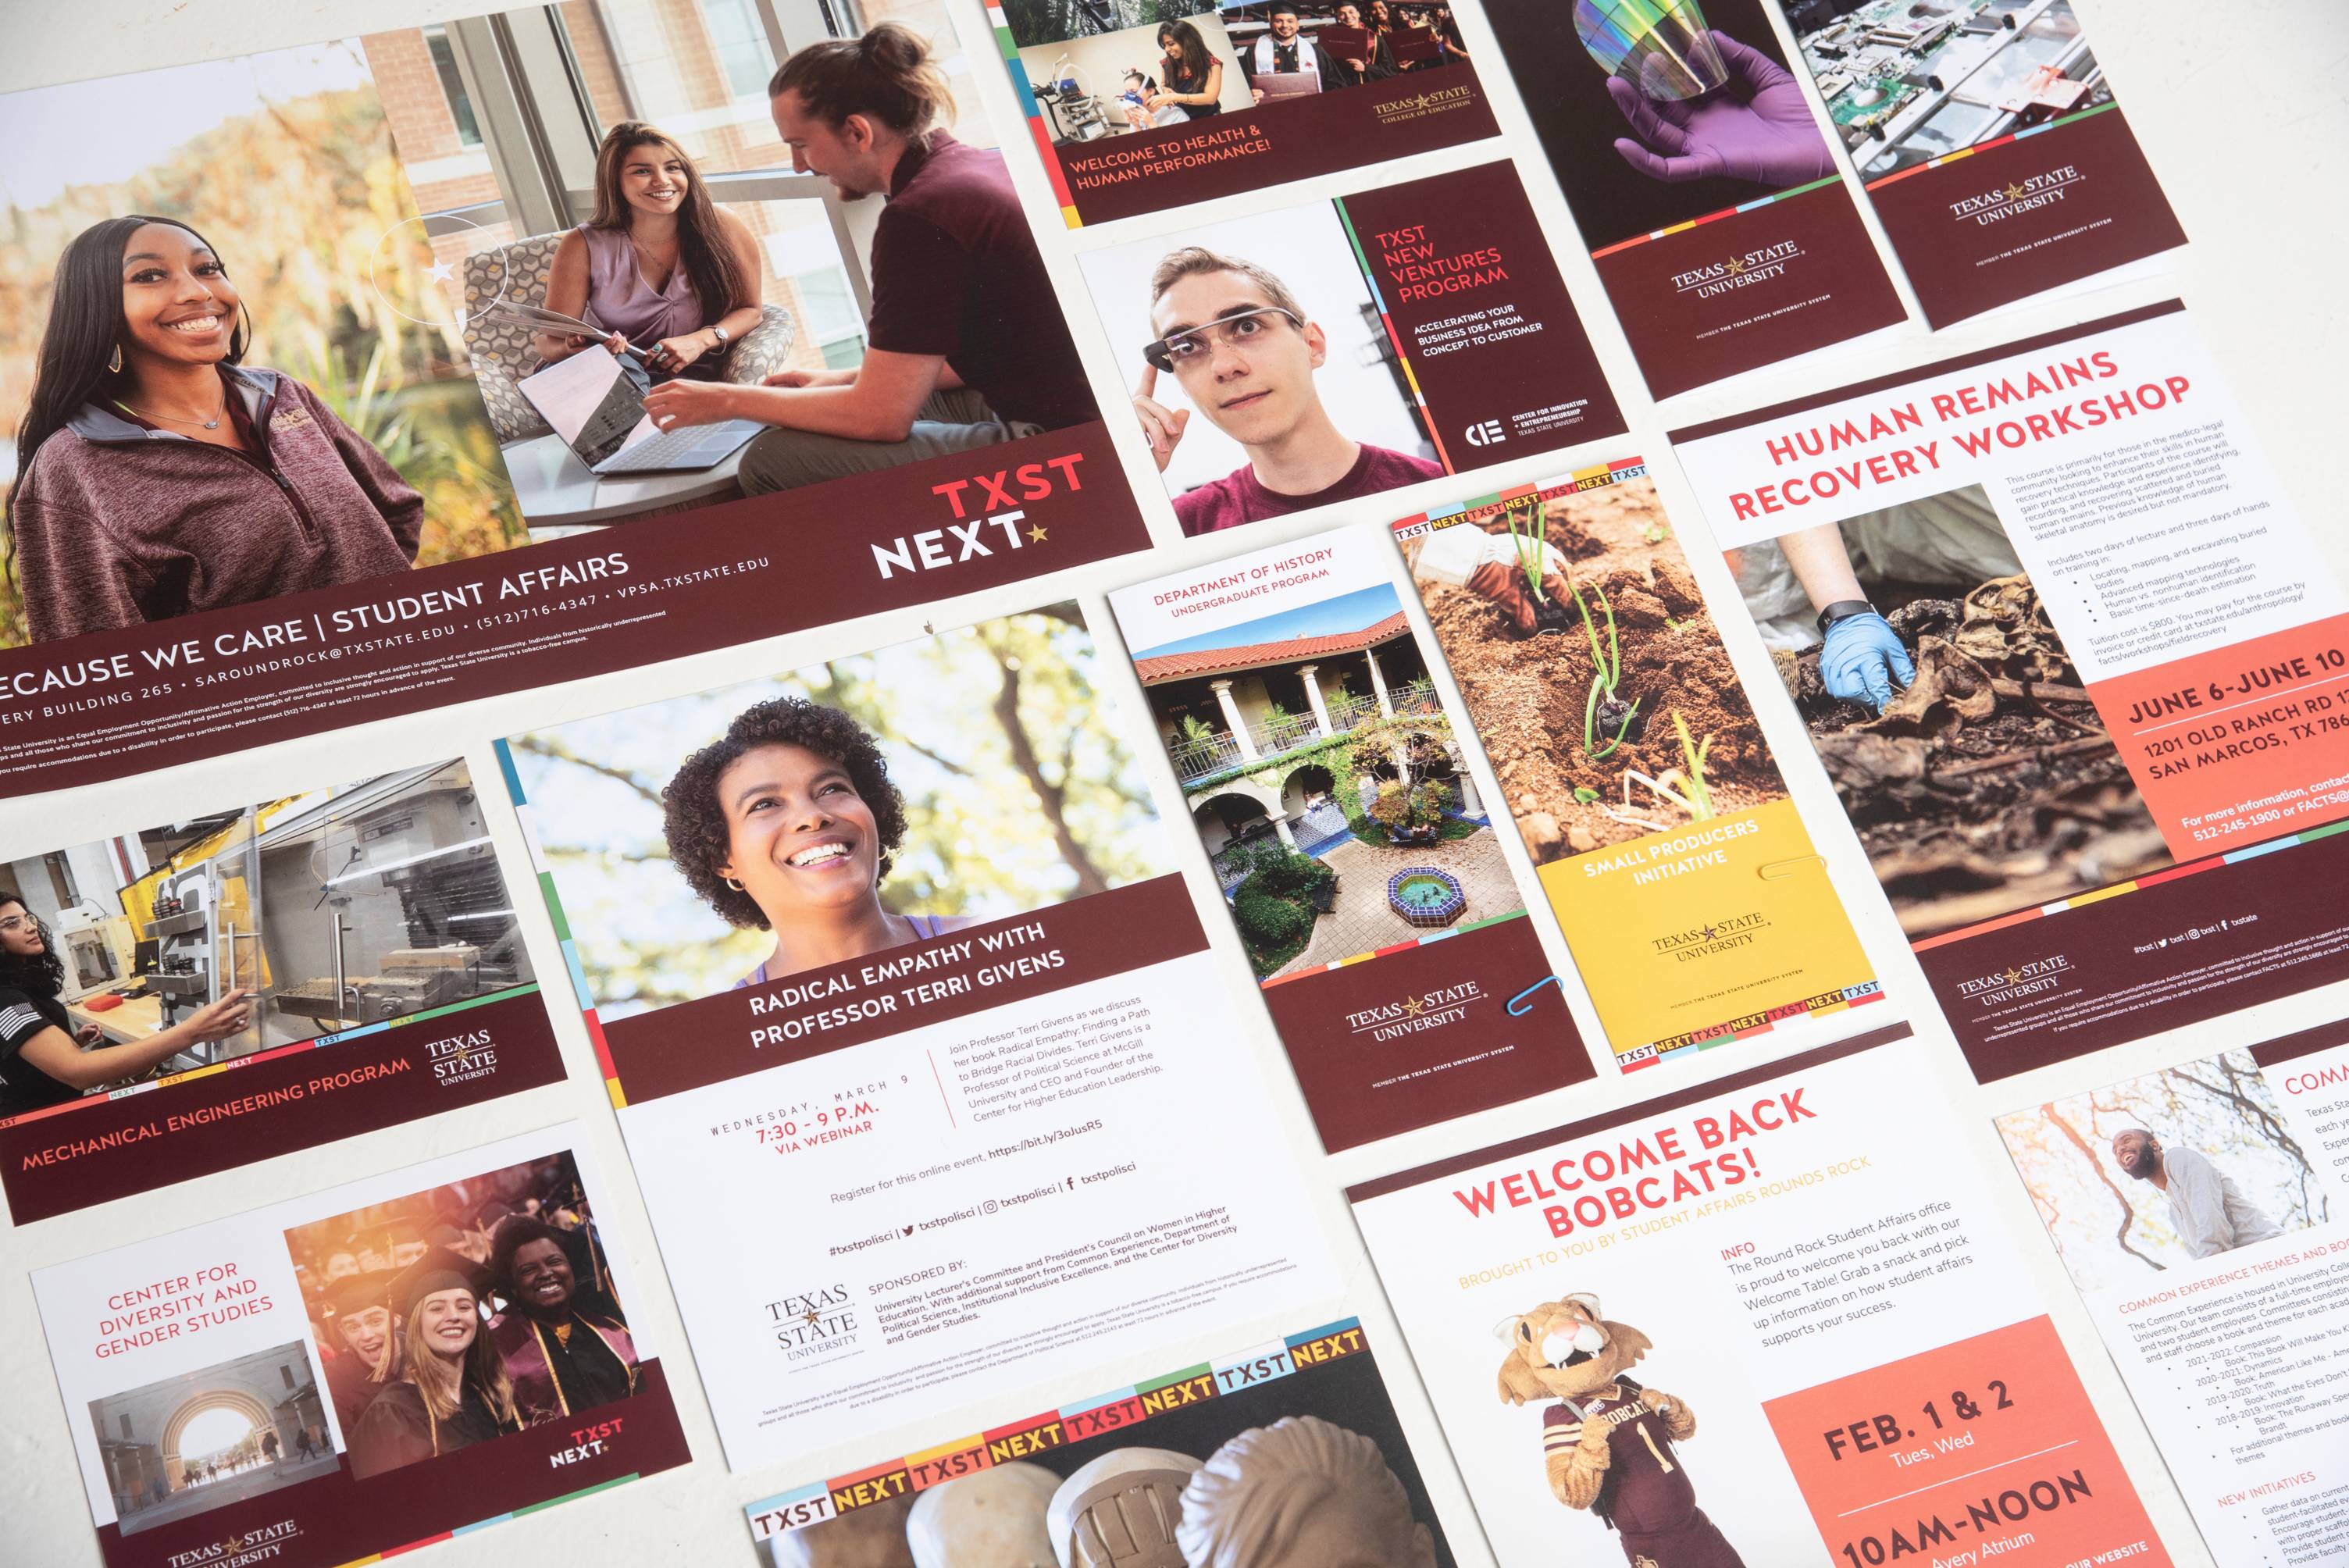 Samples of work done in Marq show how campus partners are using templates to create their own brochures, flyers, and posters.